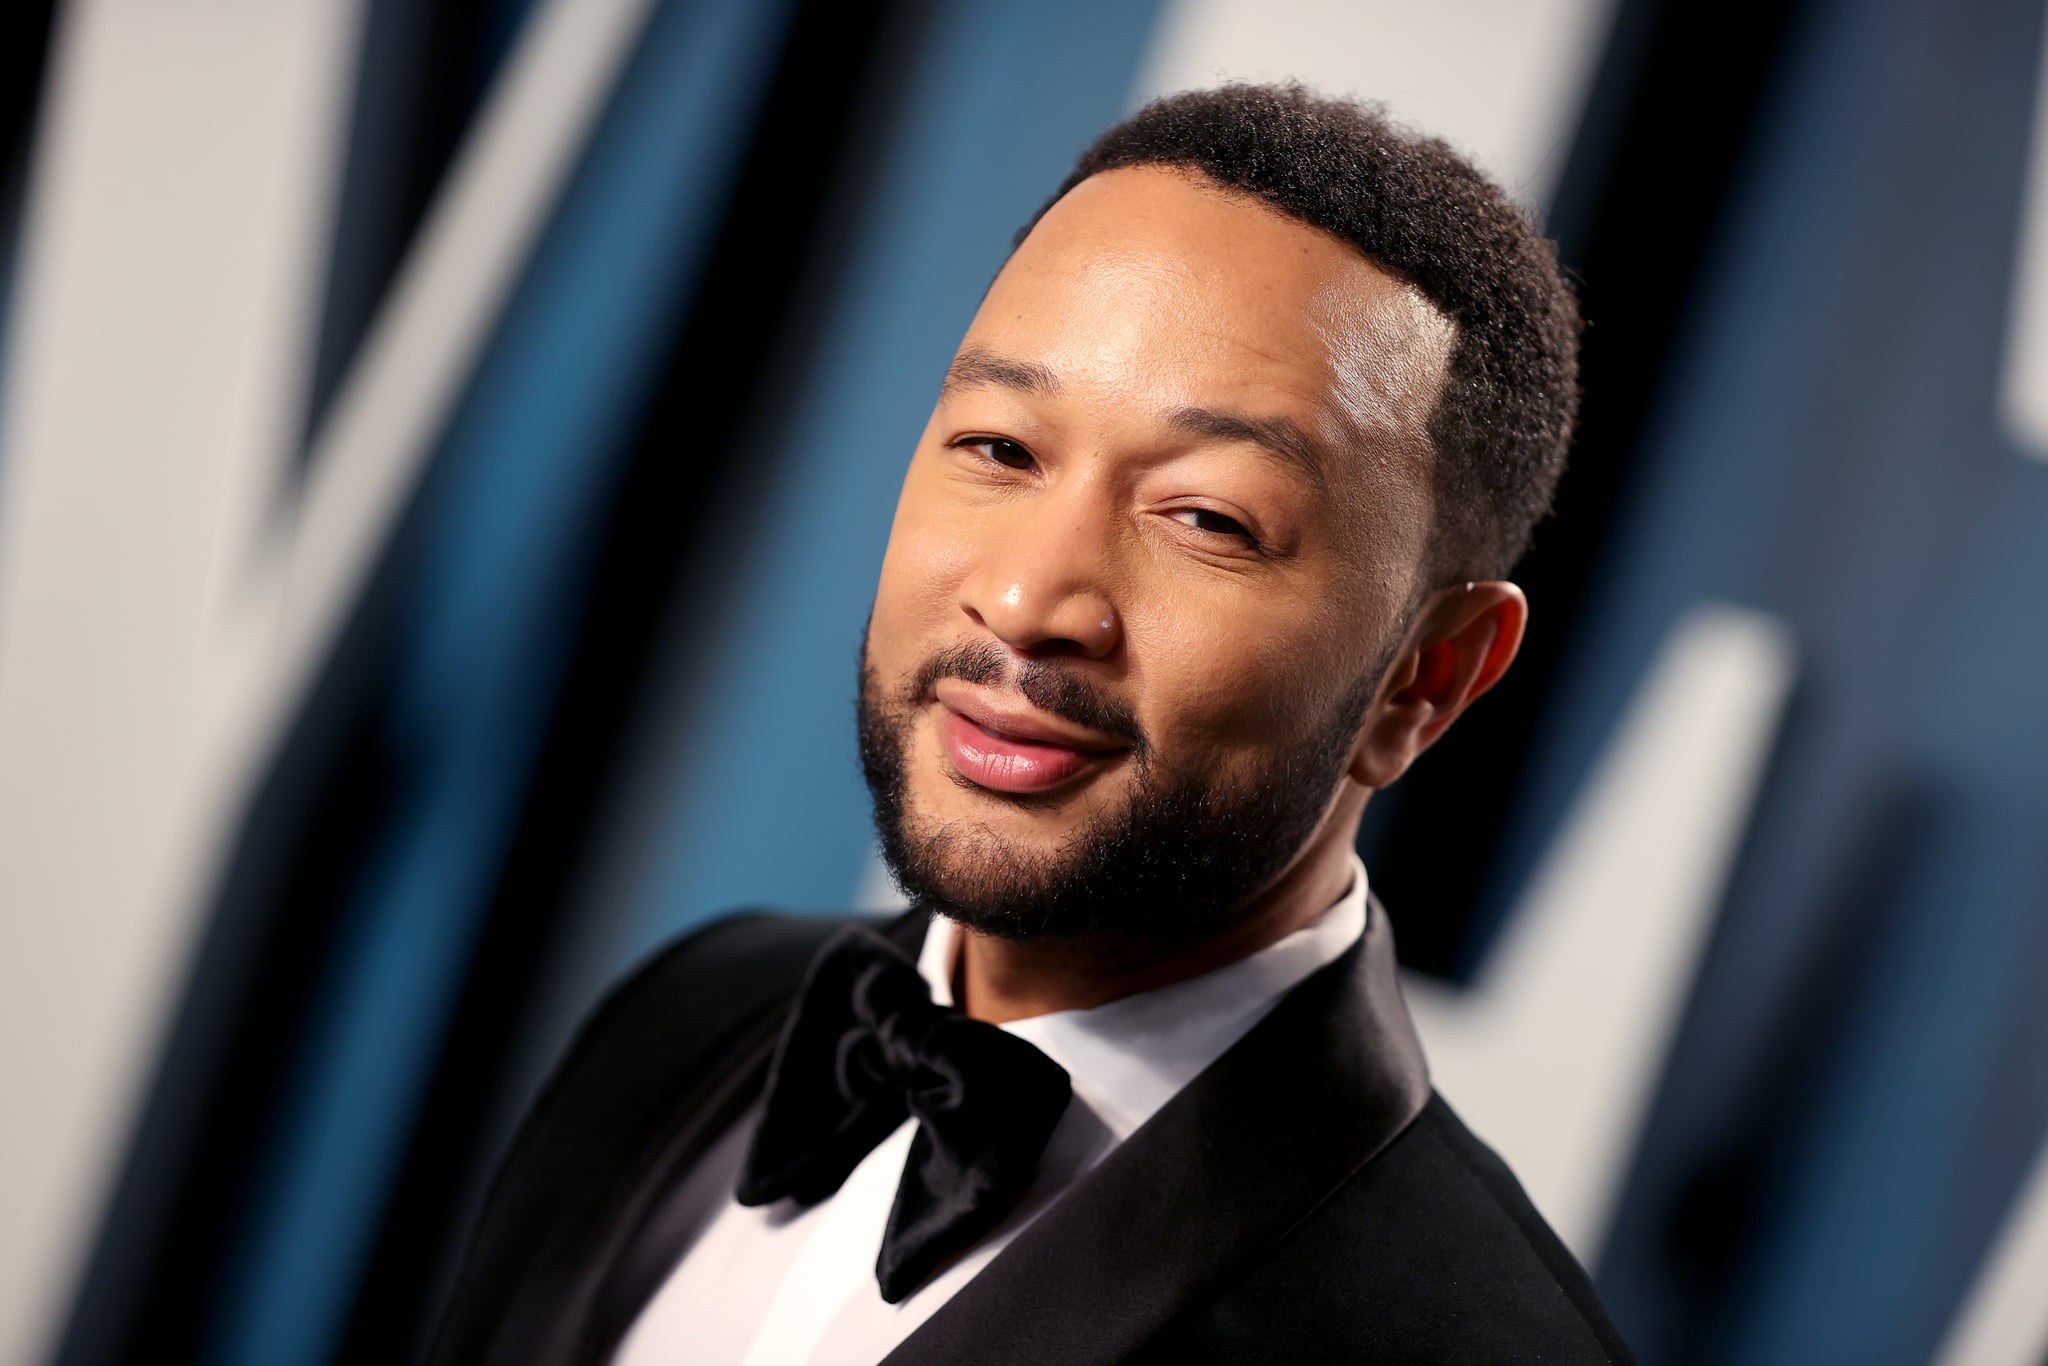 BEVERLY HILLS, CALIFORNIA - FEBRUARY 09: John Legend attends the 2020 Vanity Fair Oscar Party hosted by Radhika Jones at Wallis Annenberg Center for the Performing Arts on February 09, 2020 in Beverly Hills, California. (Photo by Rich Fury/VF20/Getty Images for Vanity Fair)